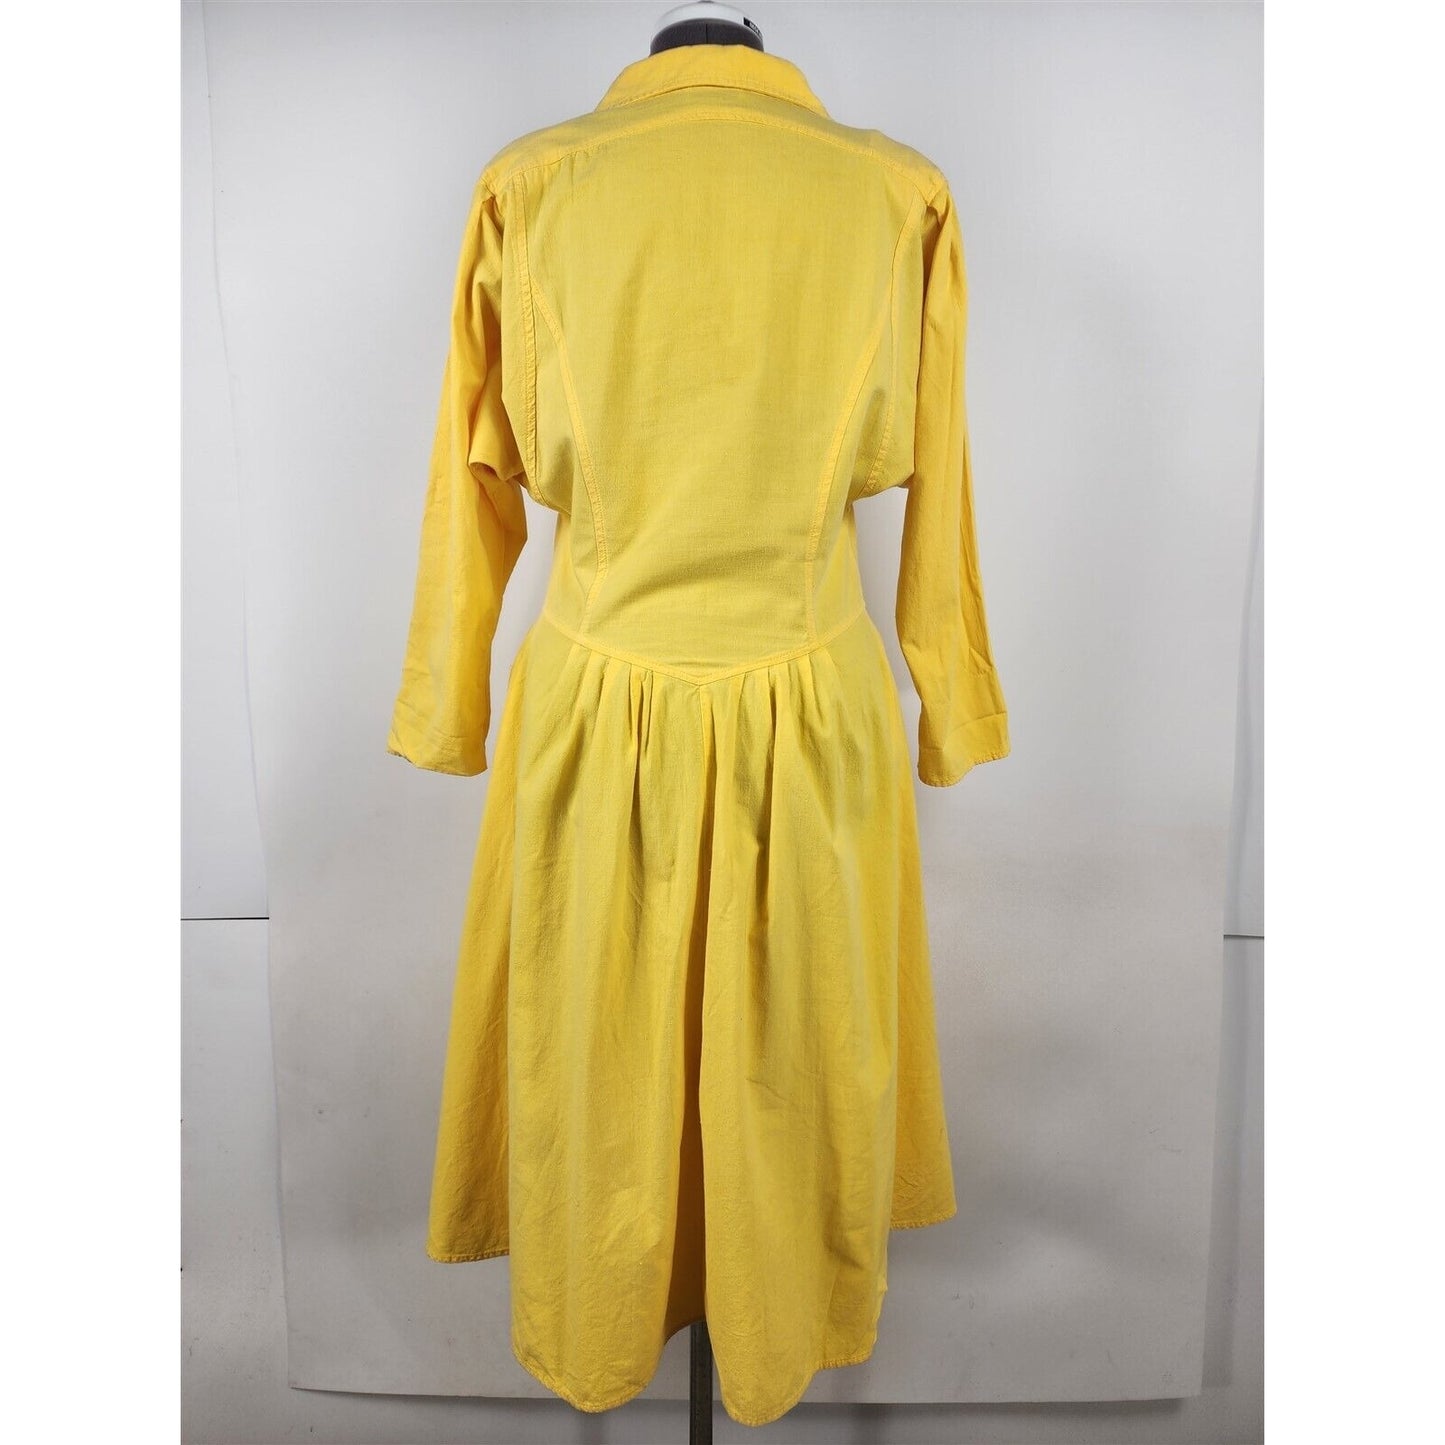 Vintage 1980s Pea Patch New York Yellow Long Sleeve Cotton Dress